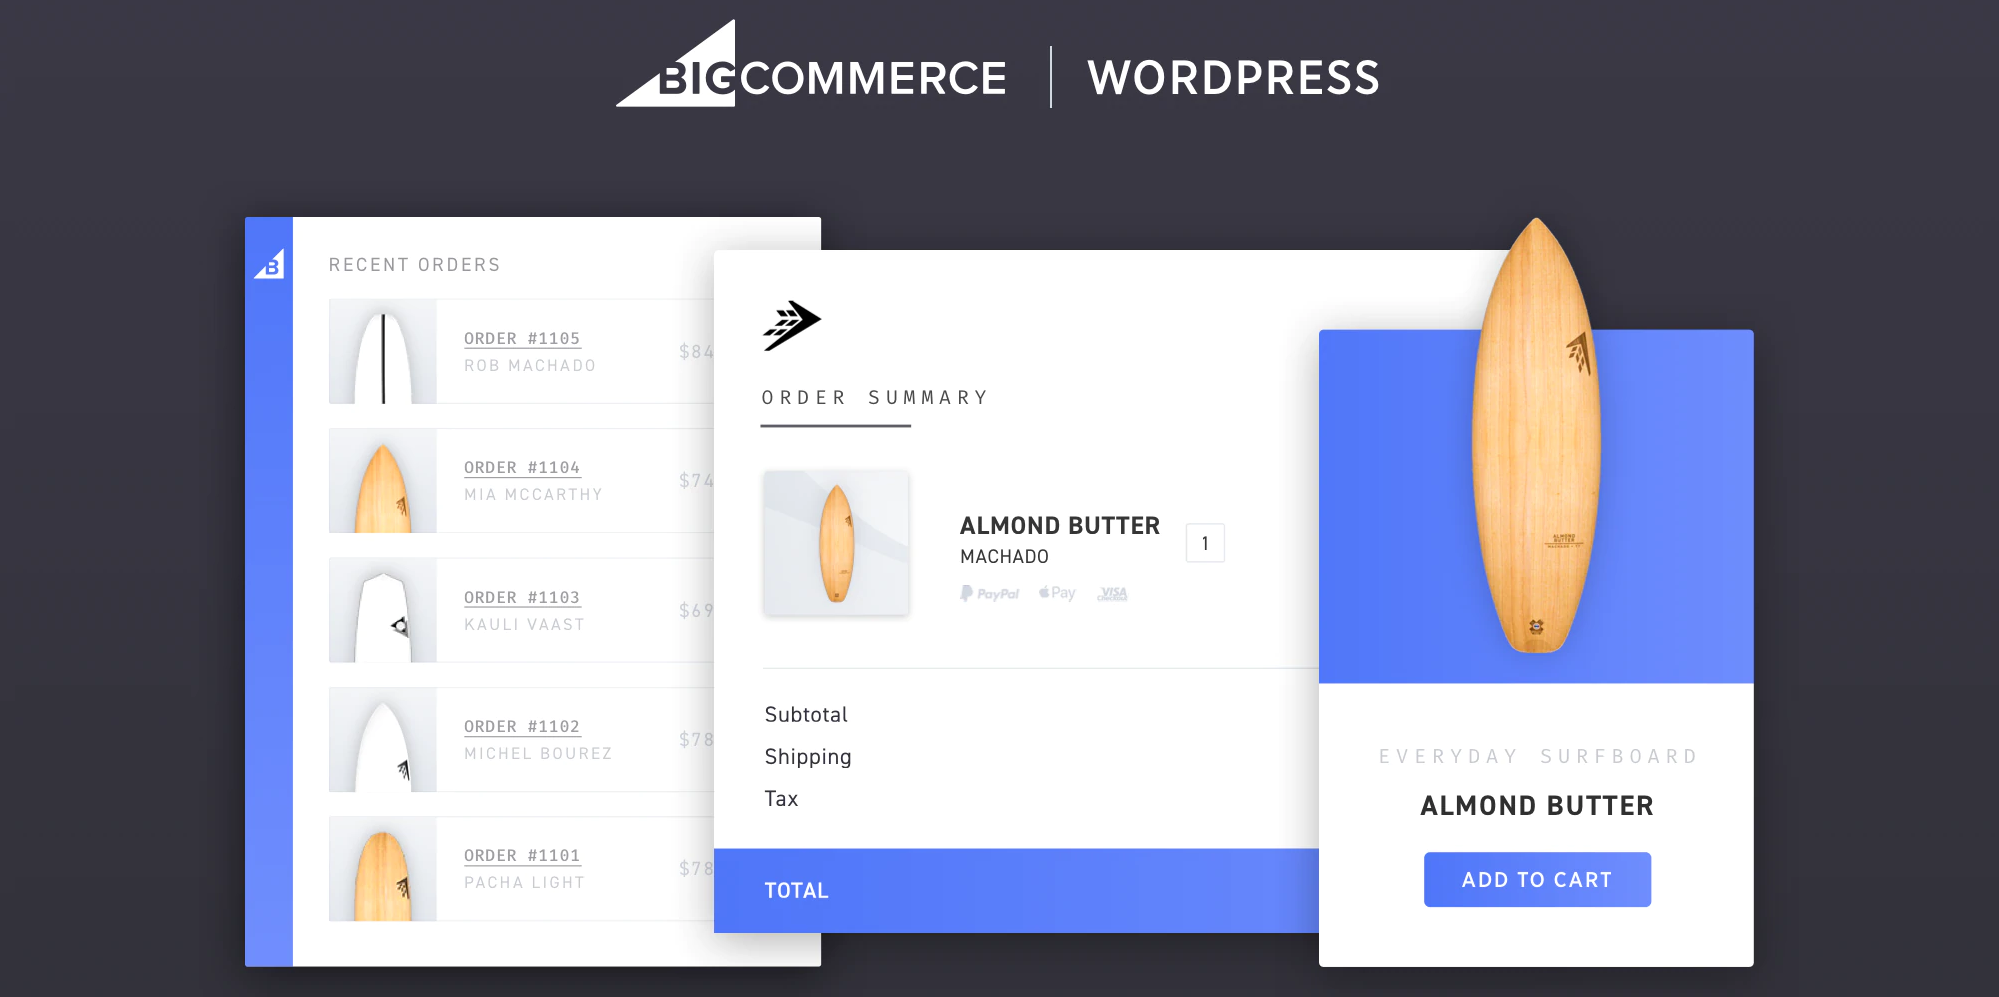 What makes BigCommerce WordPress Plugin stand out from others?